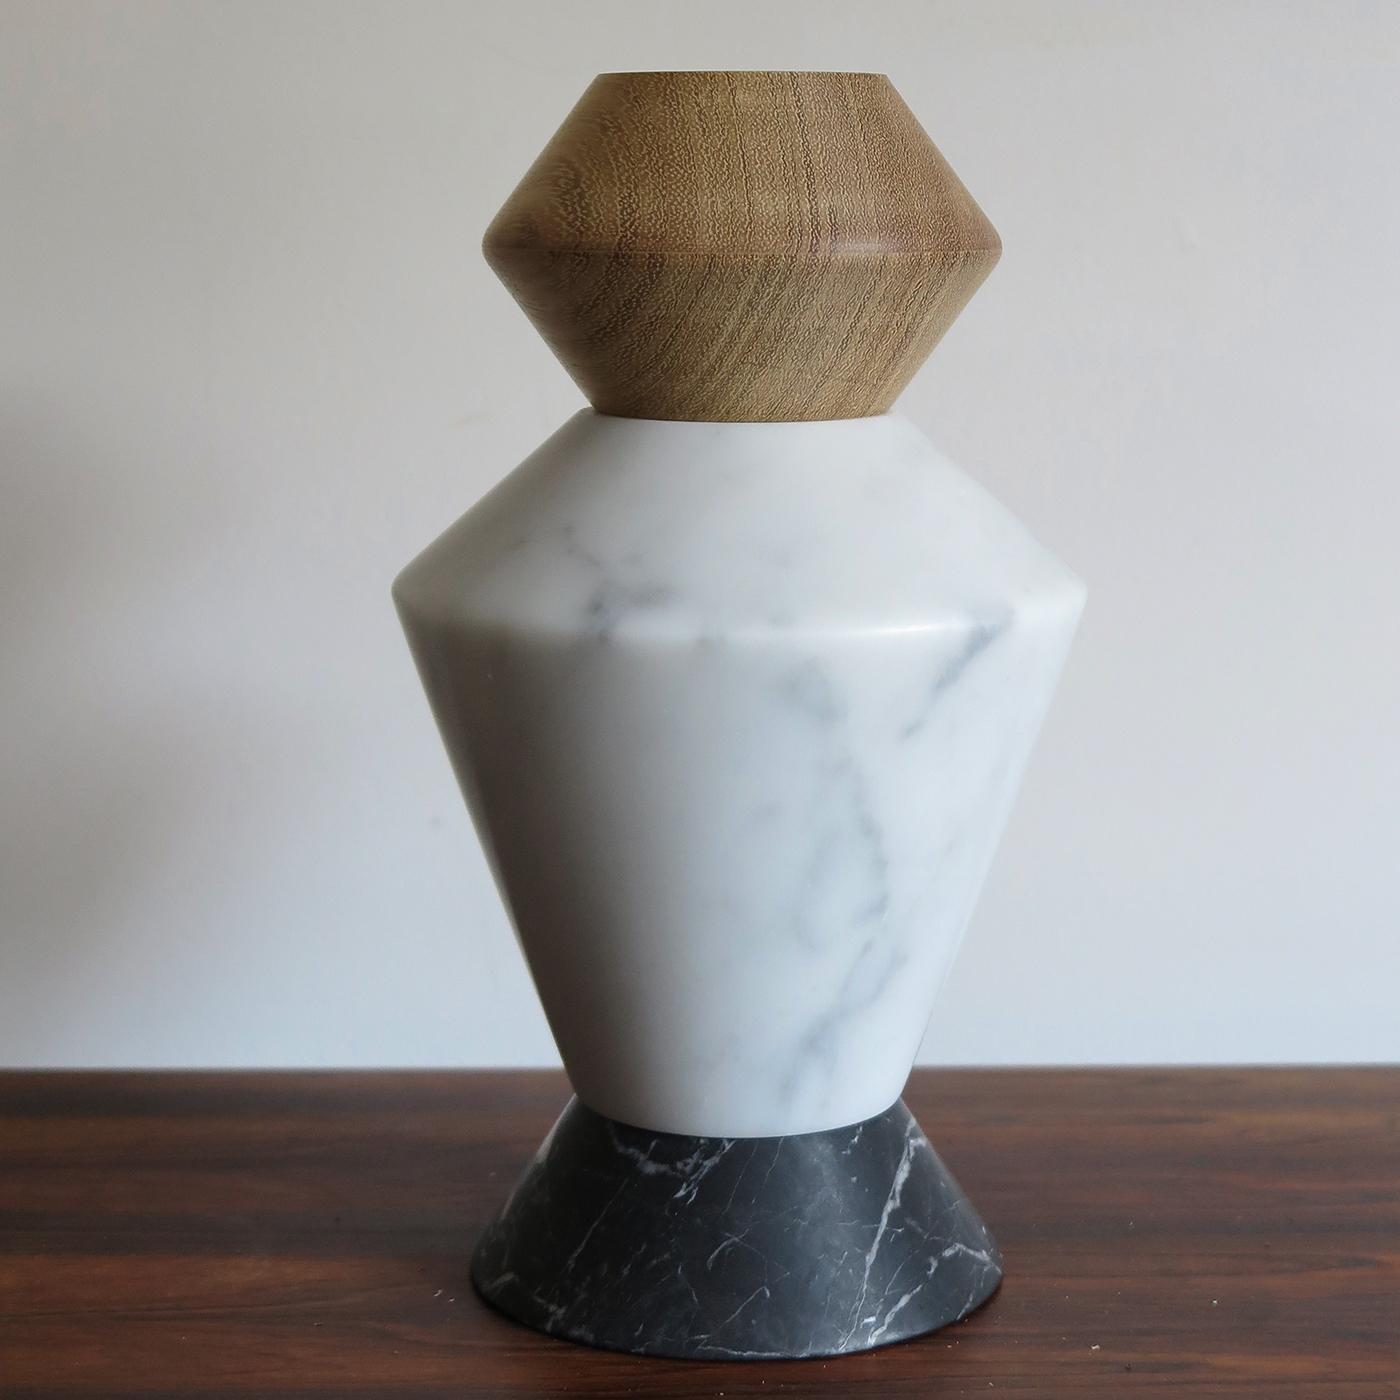 An example of exquisite traditional craftsmanship that relies on pure, authentic materials, this iTotem is a sculptural work of art that functions as a vase or candle holder. Arranged in a unique, variable composition, it features four geometric